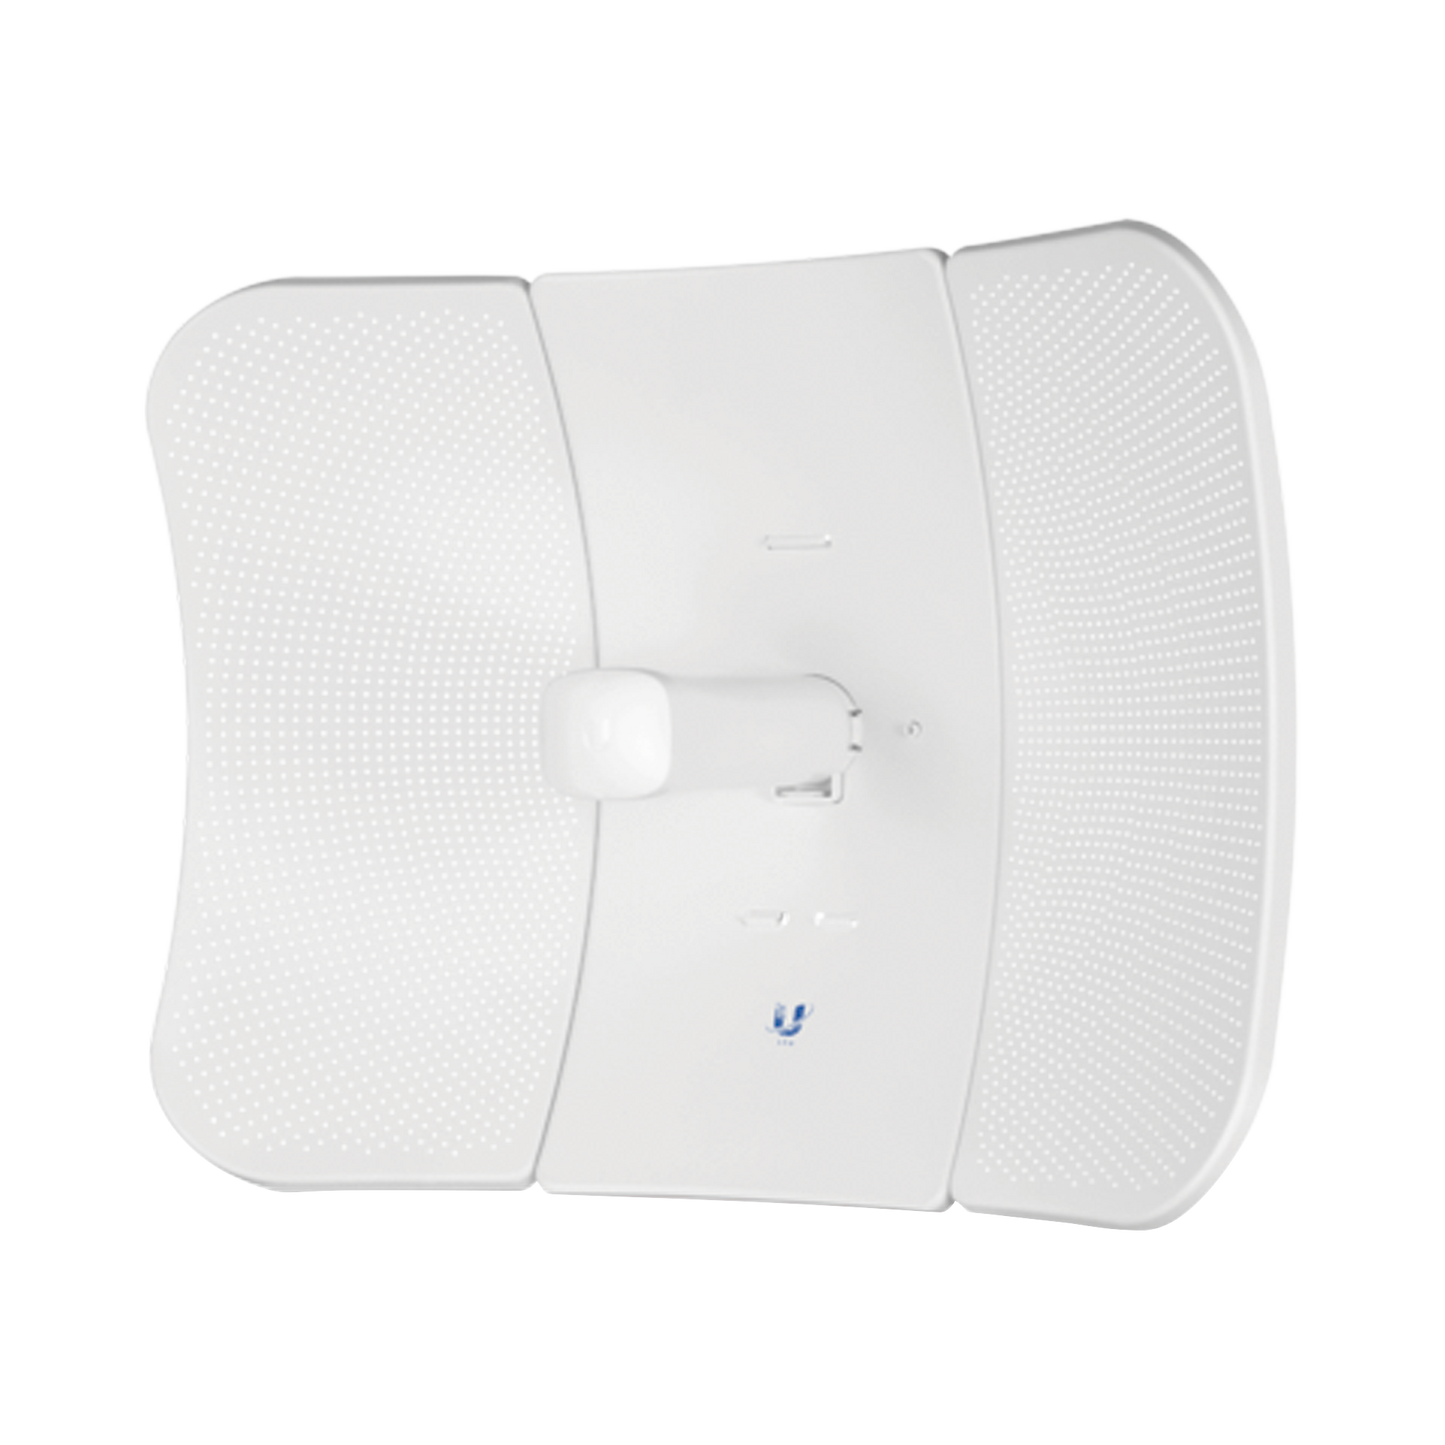 5 GHz PtMP LTU™ Long Range Client Radio with High-Power InnerFeed, (4.8 - 6.2 GHz) with 26 dBi - US Version